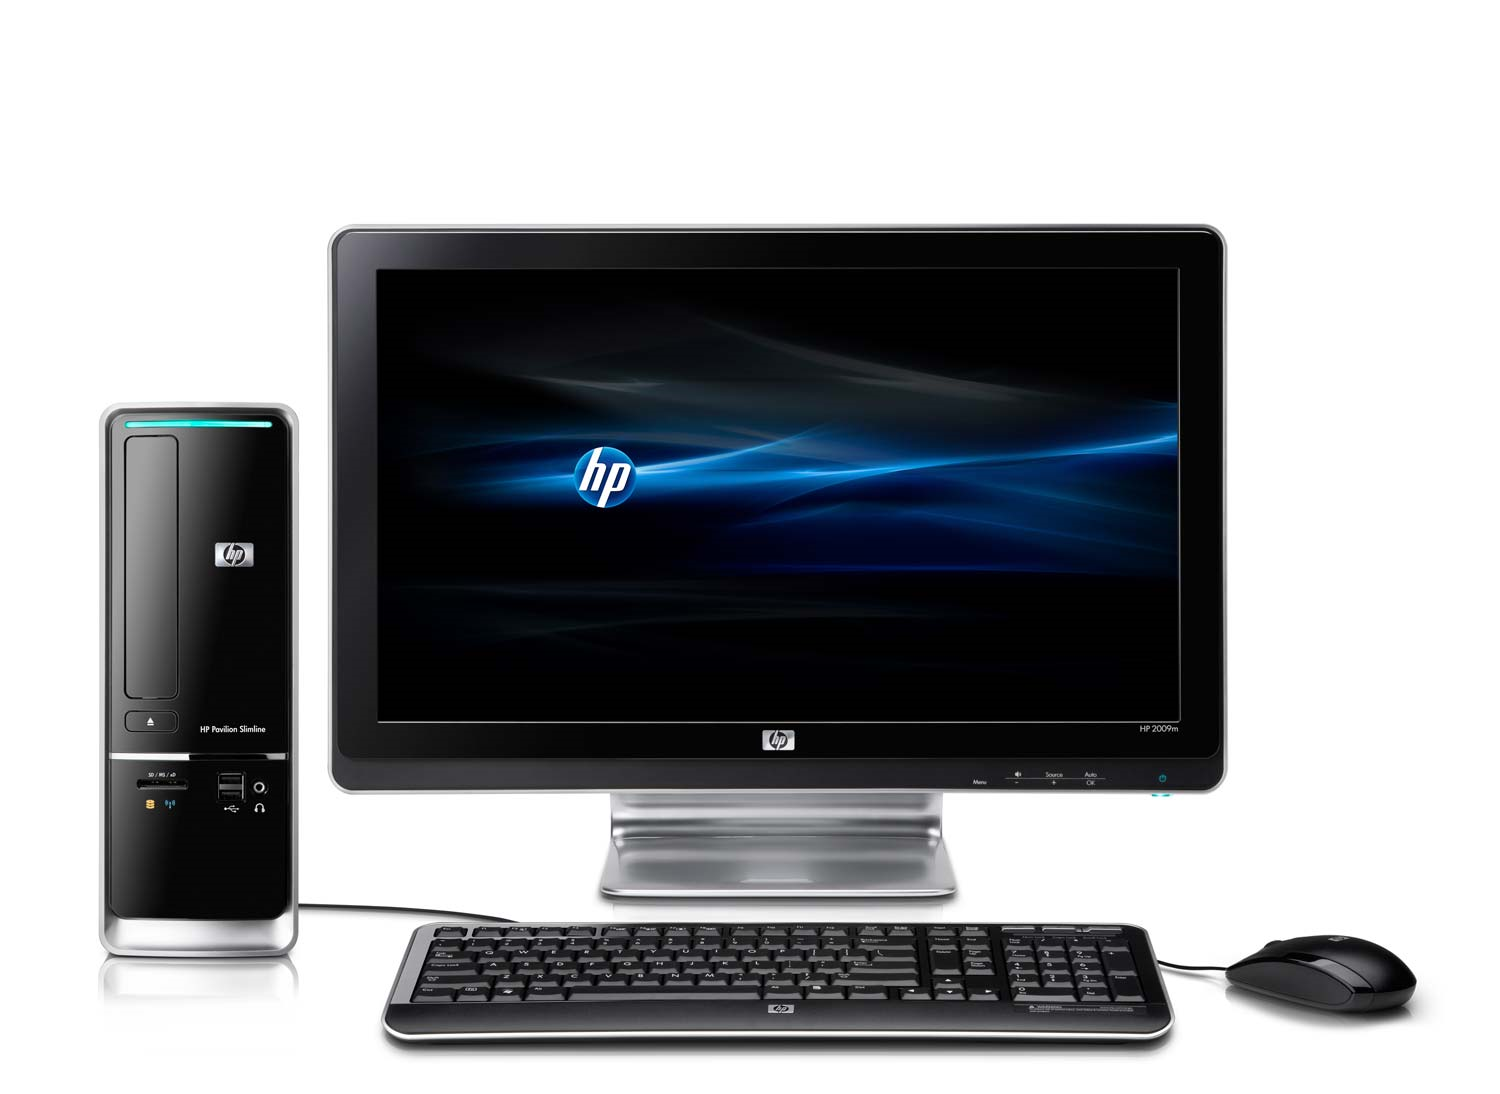 Acer Aspire Z3 All-in-one PC 